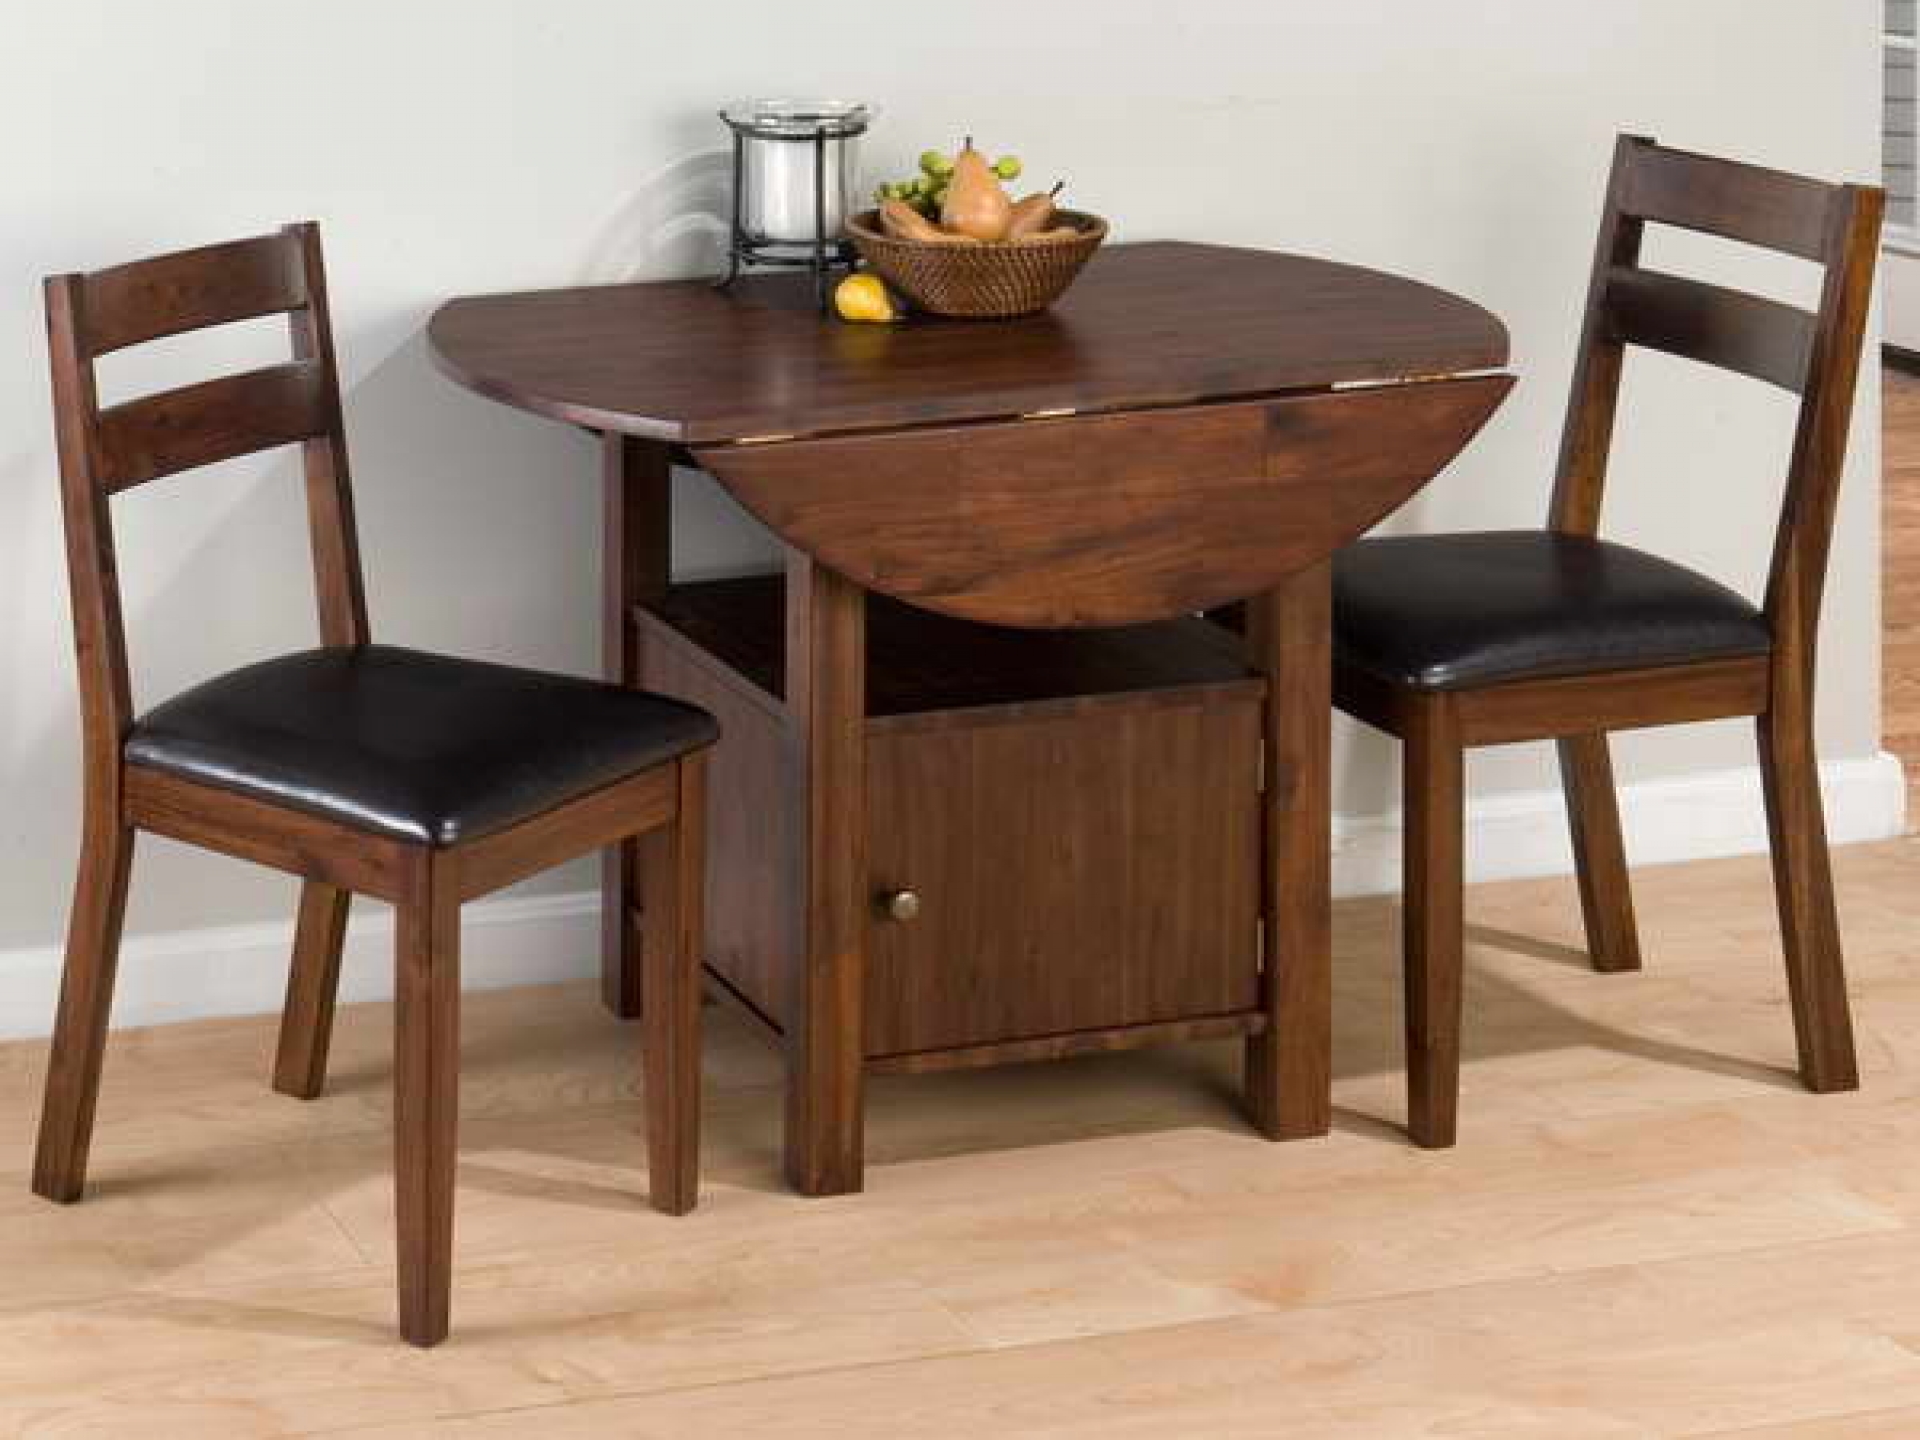 folding dining tables for small spaces - Home Decor Ideas